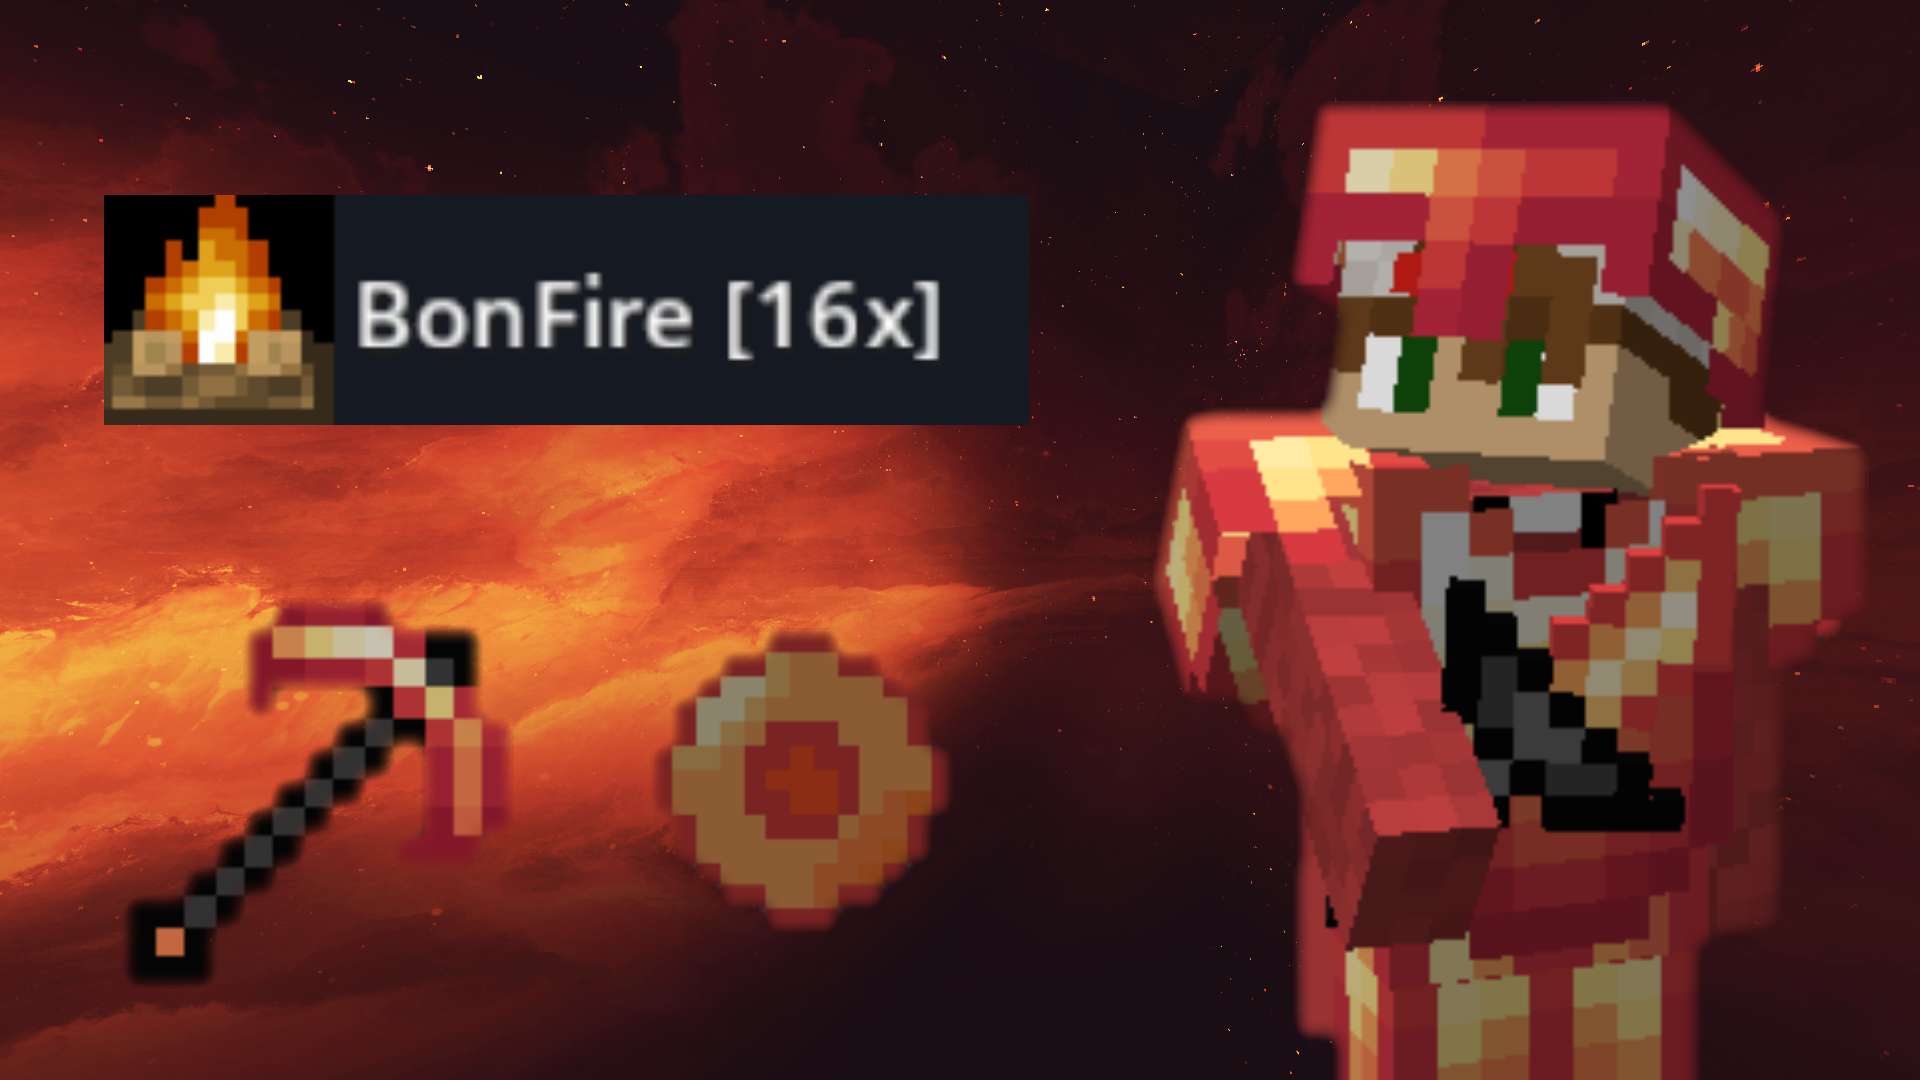 BonFire [] 16x by oCubic & Tory on PvPRP